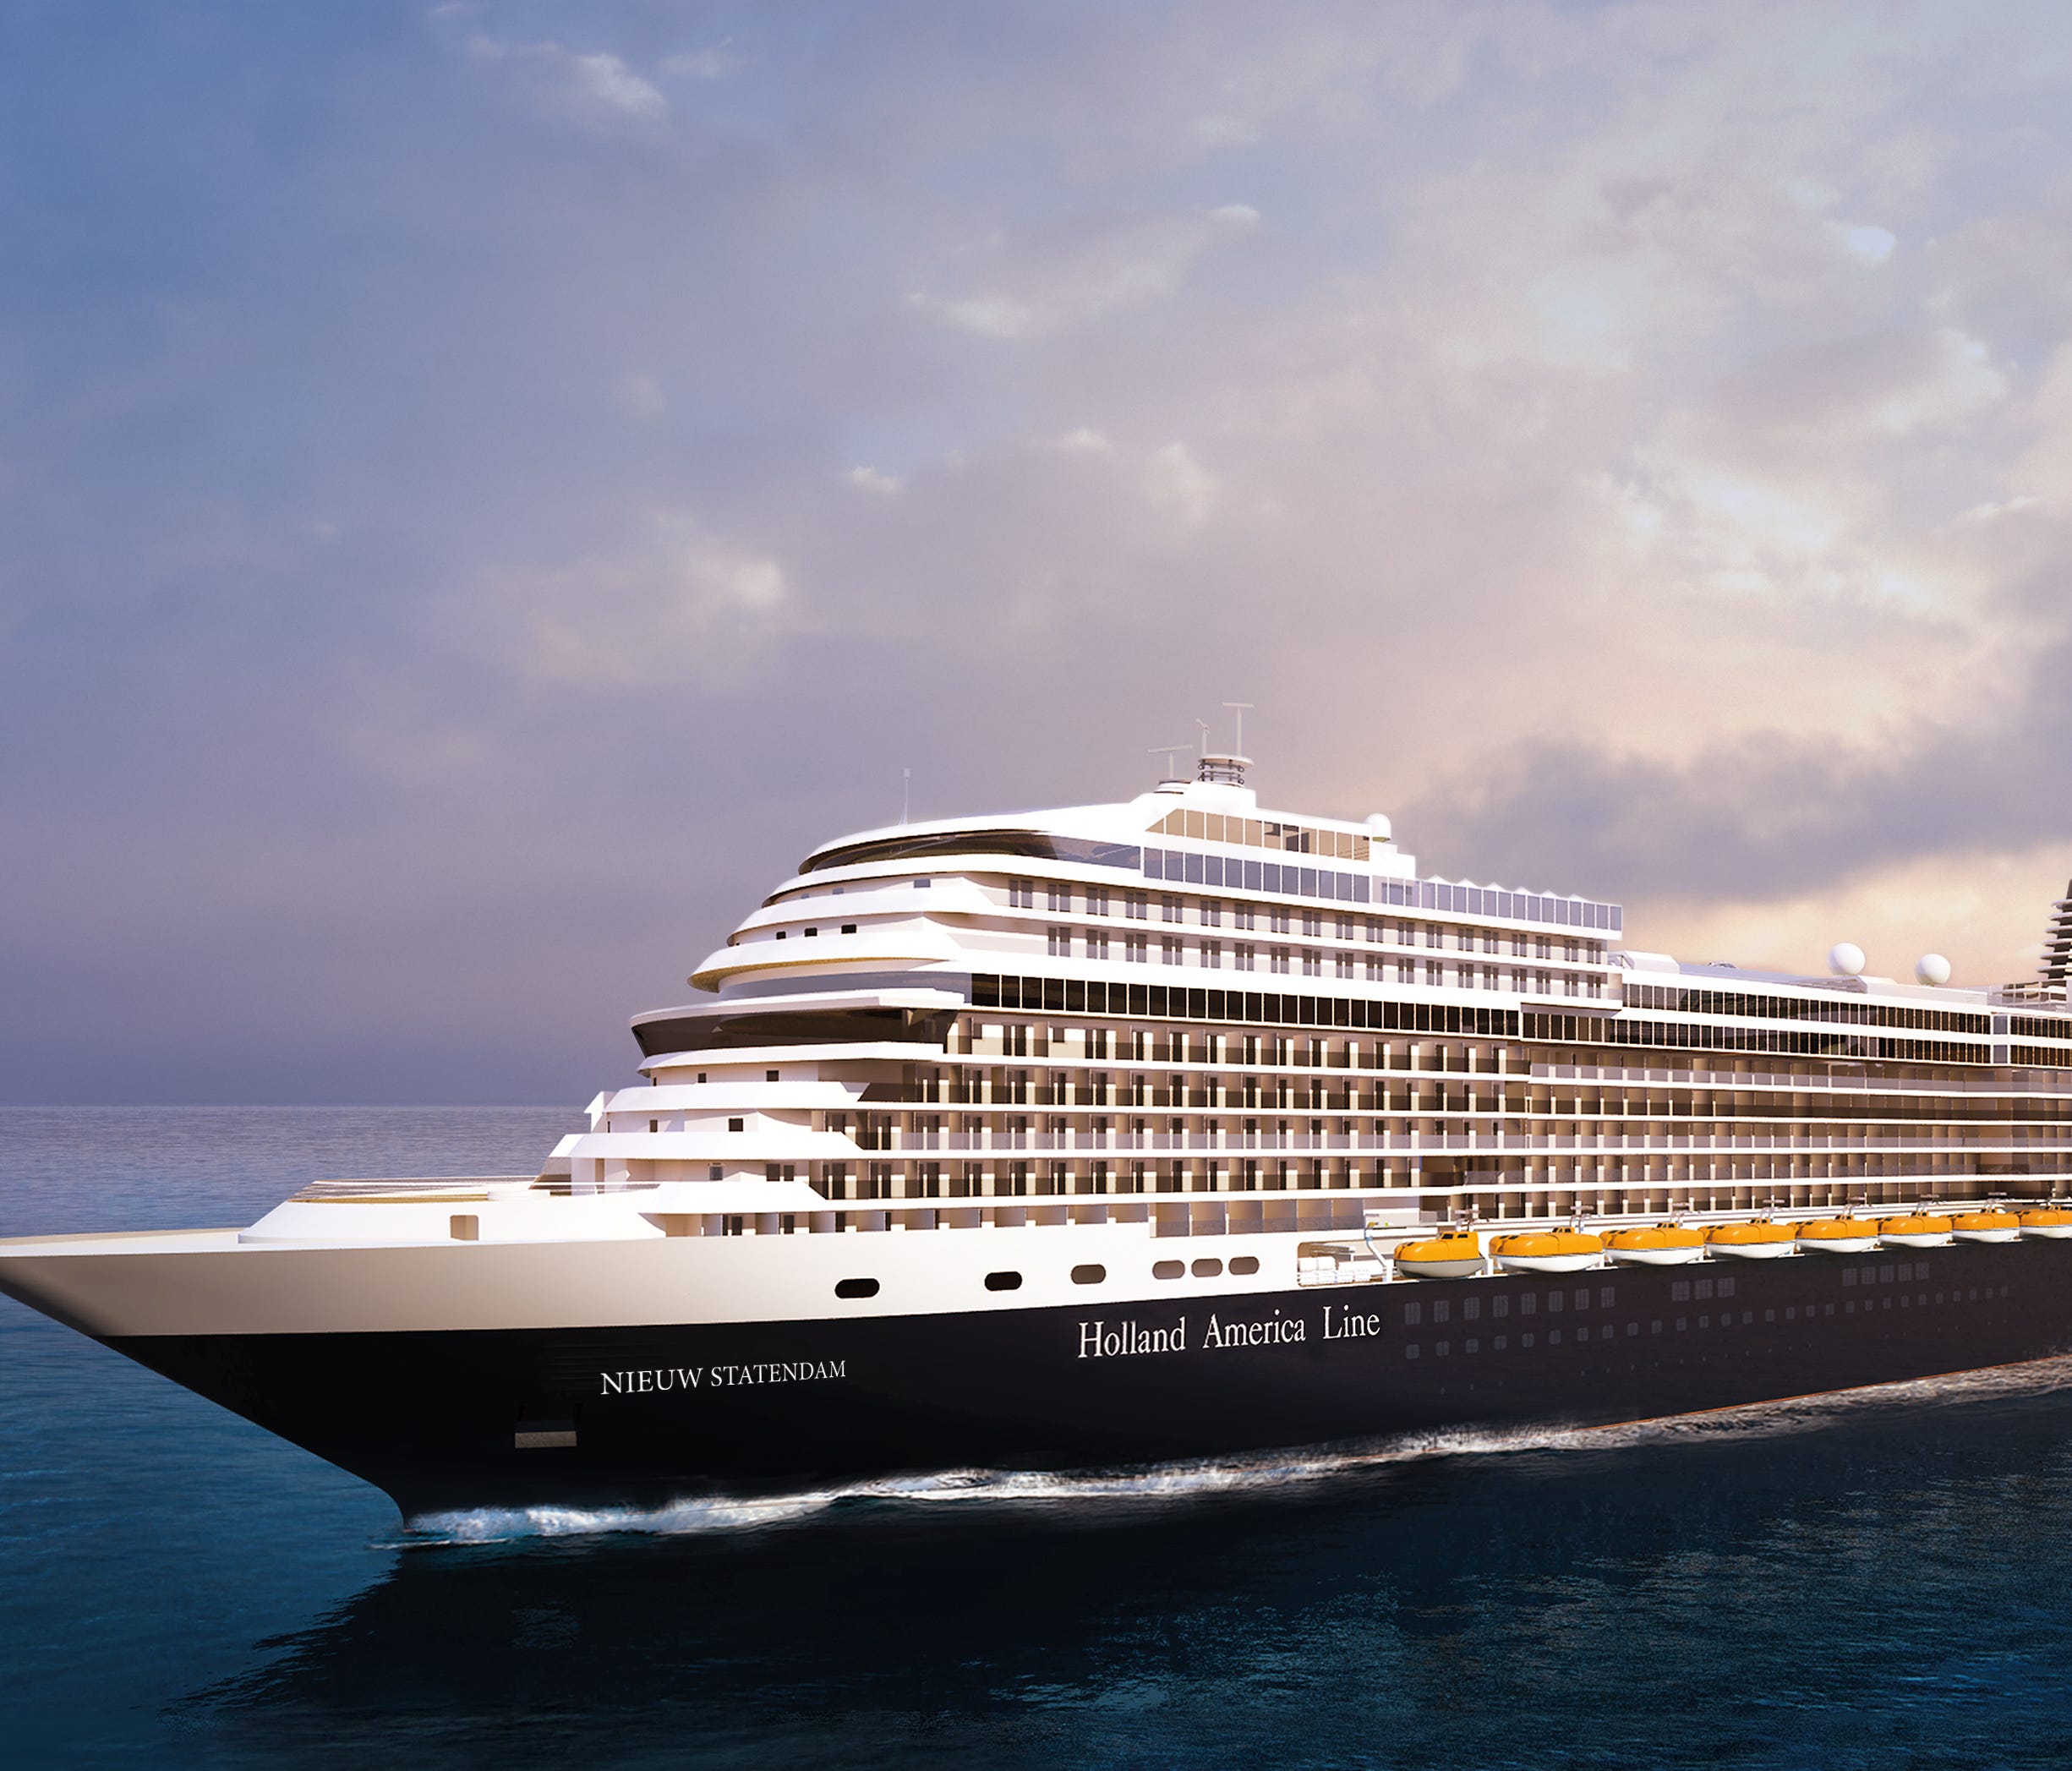 An artist's drawing of Nieuw Statendam, a Holland America ship scheduled to debut in December 2018.